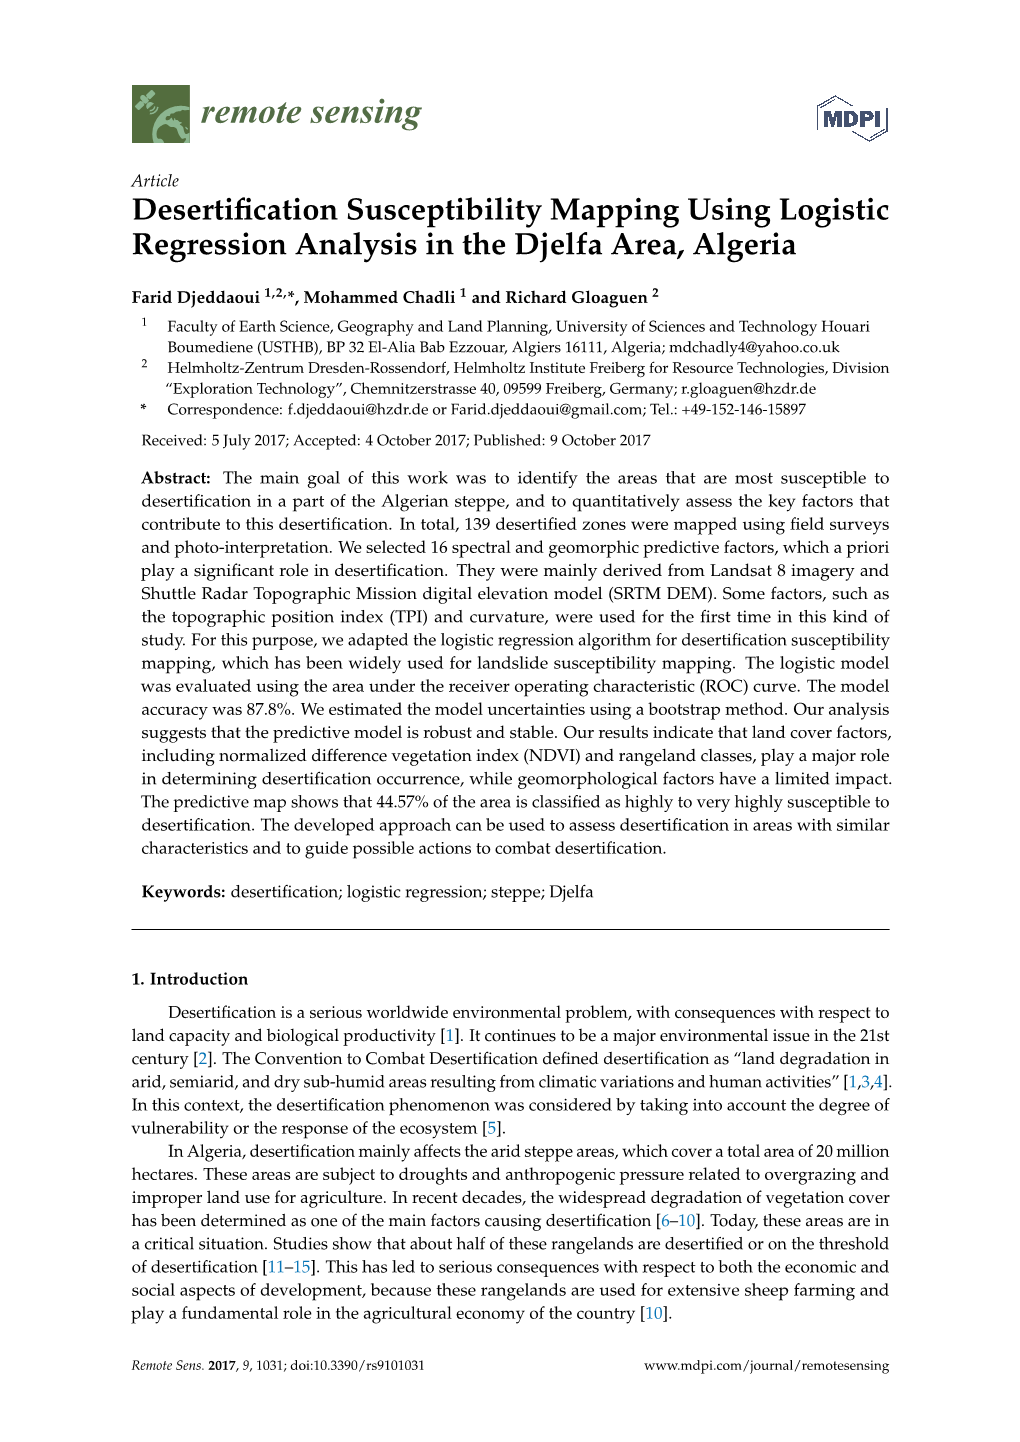 Desertification Susceptibility Mapping Using Logistic Regression Analysis